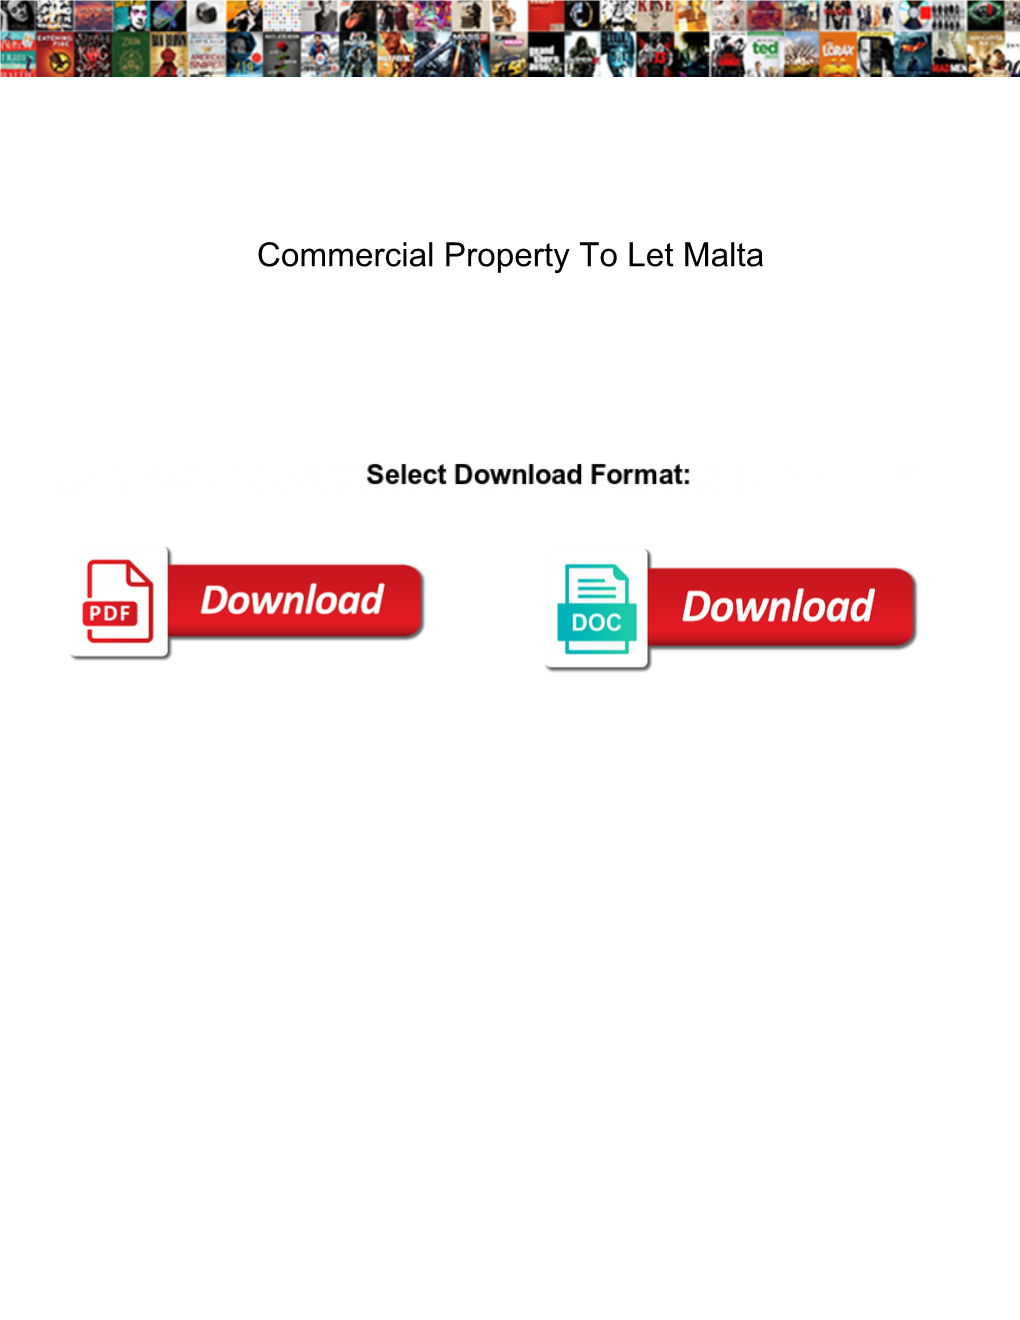 Commercial Property to Let Malta